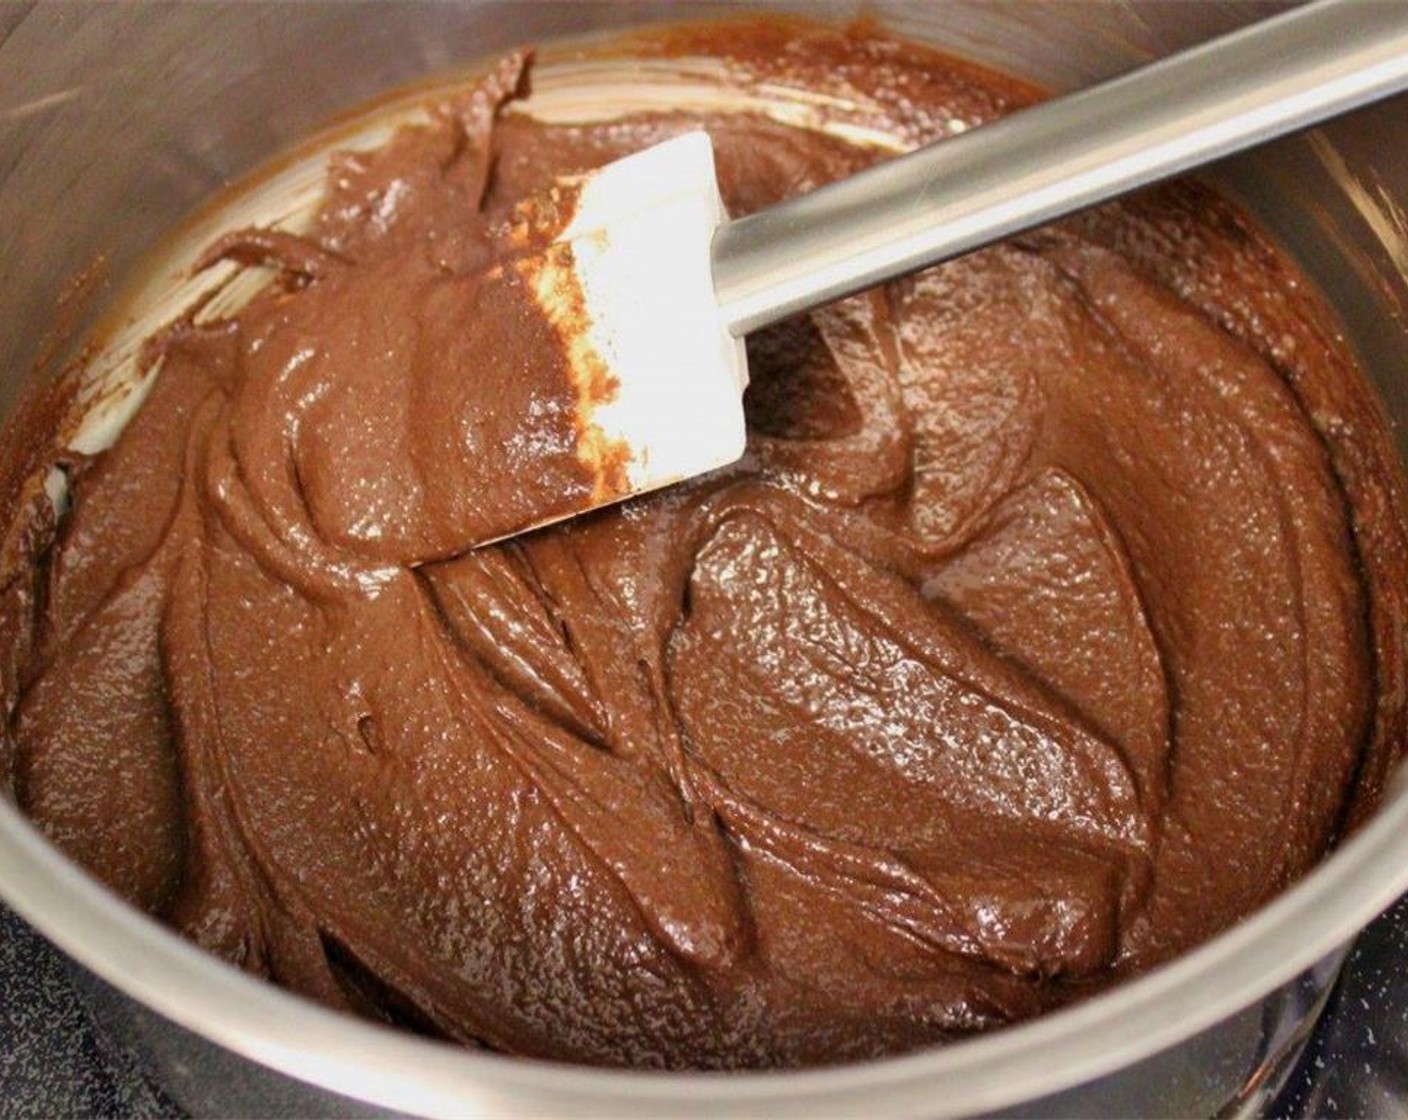 step 16 CHOCOLATE GLAZE: in a small saucepan, whisk together Unsweetened Cocoa Powder (3 Tbsp), Sour Cream (2 tubs), and Granulated Sugar (1/3 cup) while they are still cold.